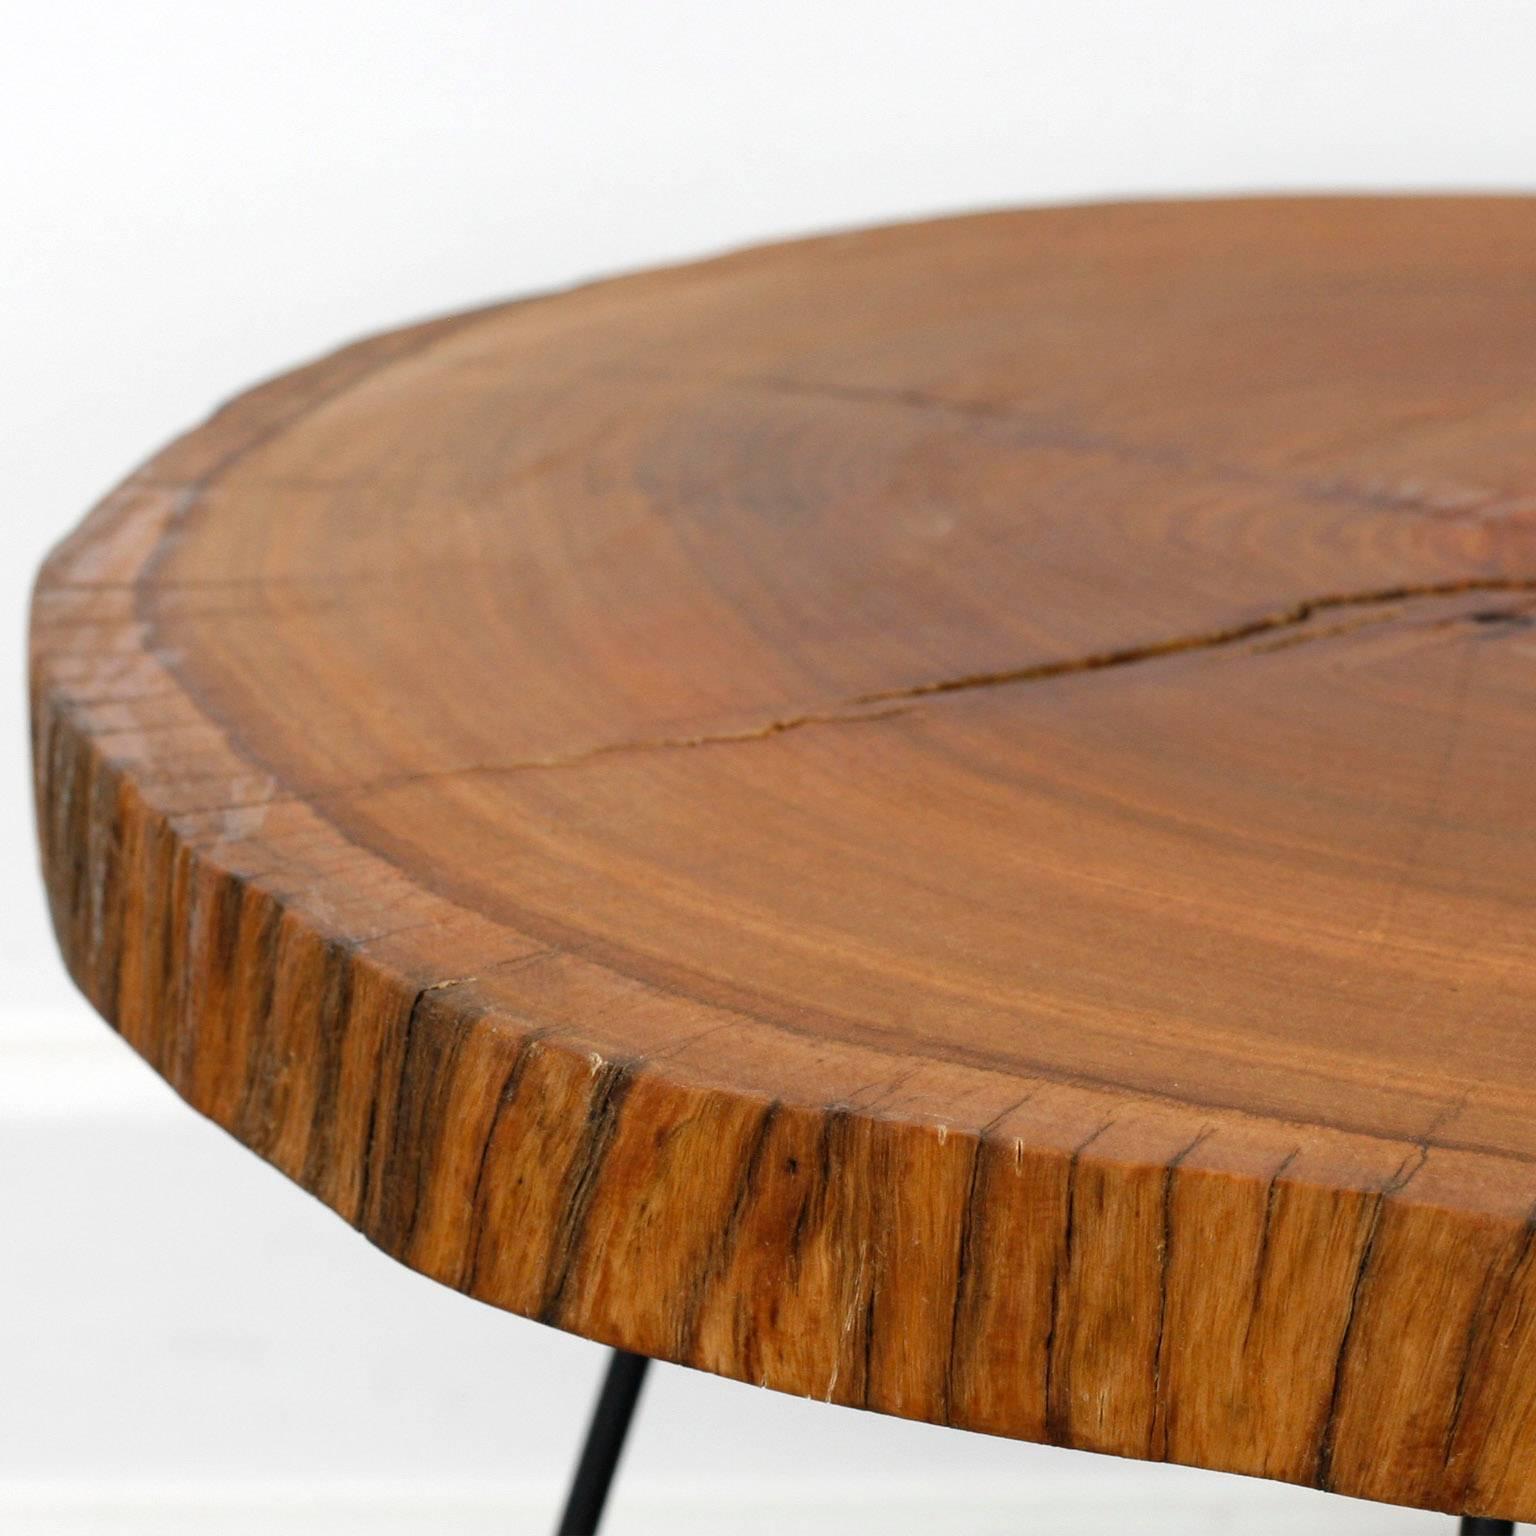 South African Contemporary Kiaat Wood Coffee Table in Oiled Finish with Steel Base For Sale